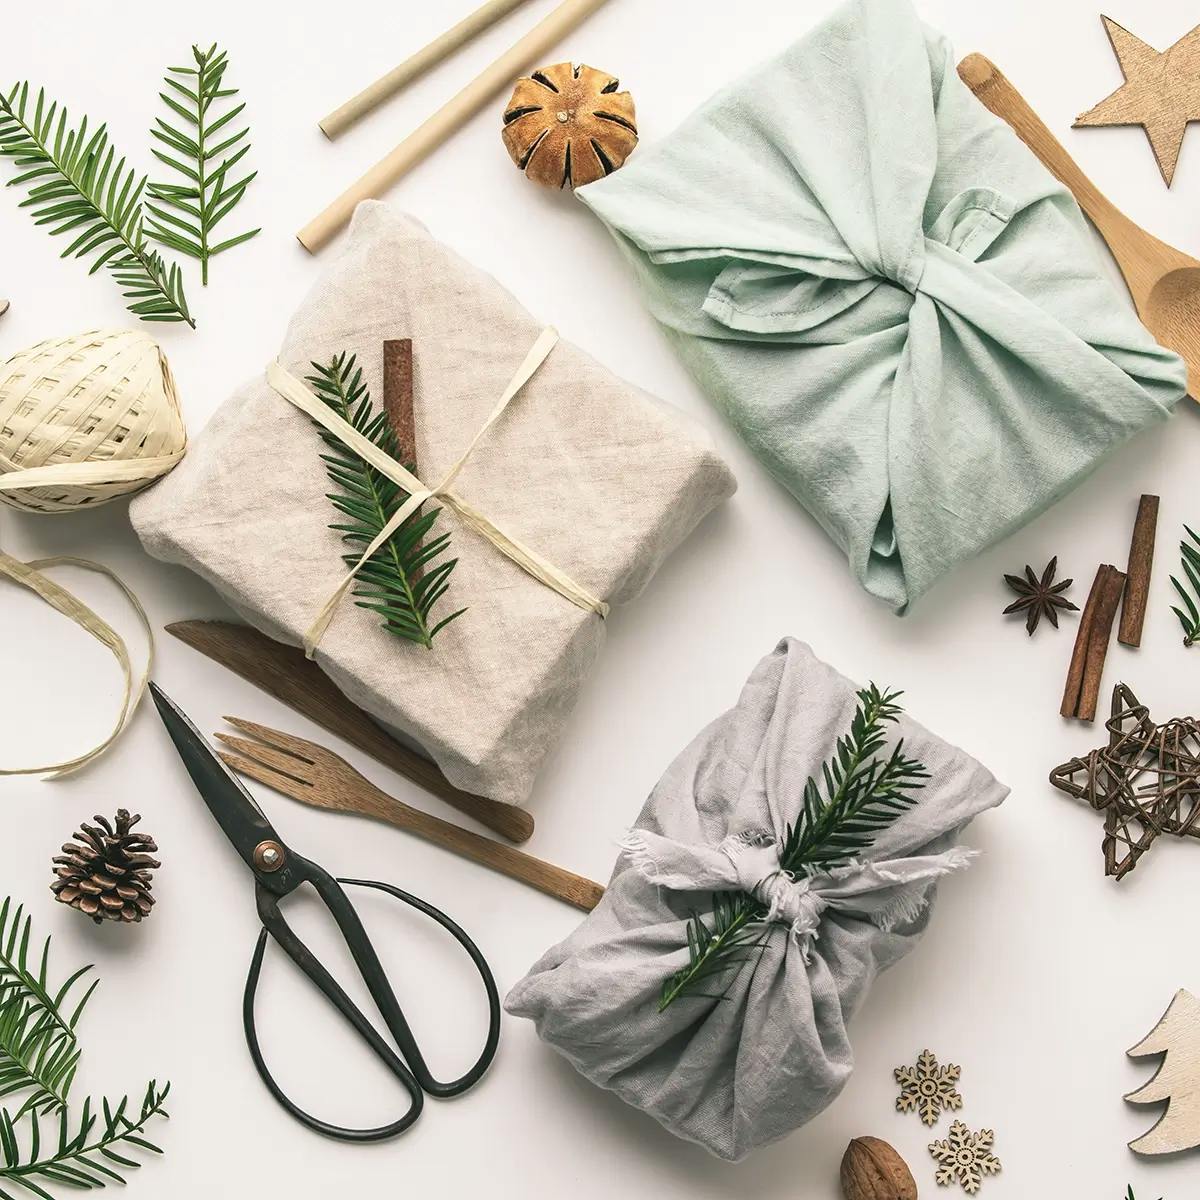 Holiday gifts wrapped in eco-friendly cloth and decorated with sustainable twine.